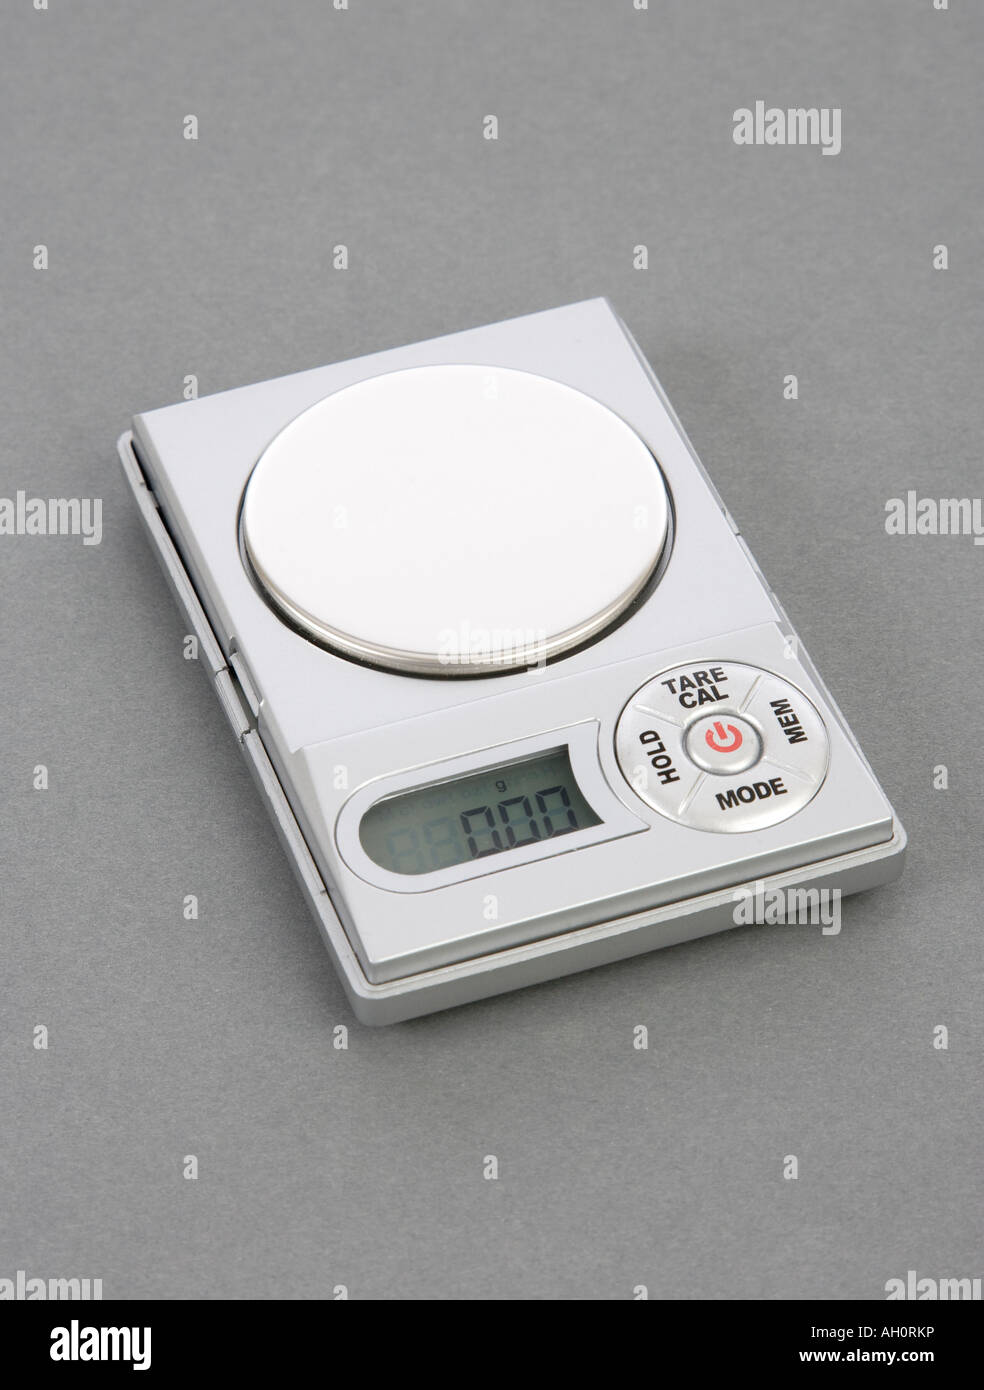 Measuring Weight - Stock Image - C007/8210 - Science Photo Library